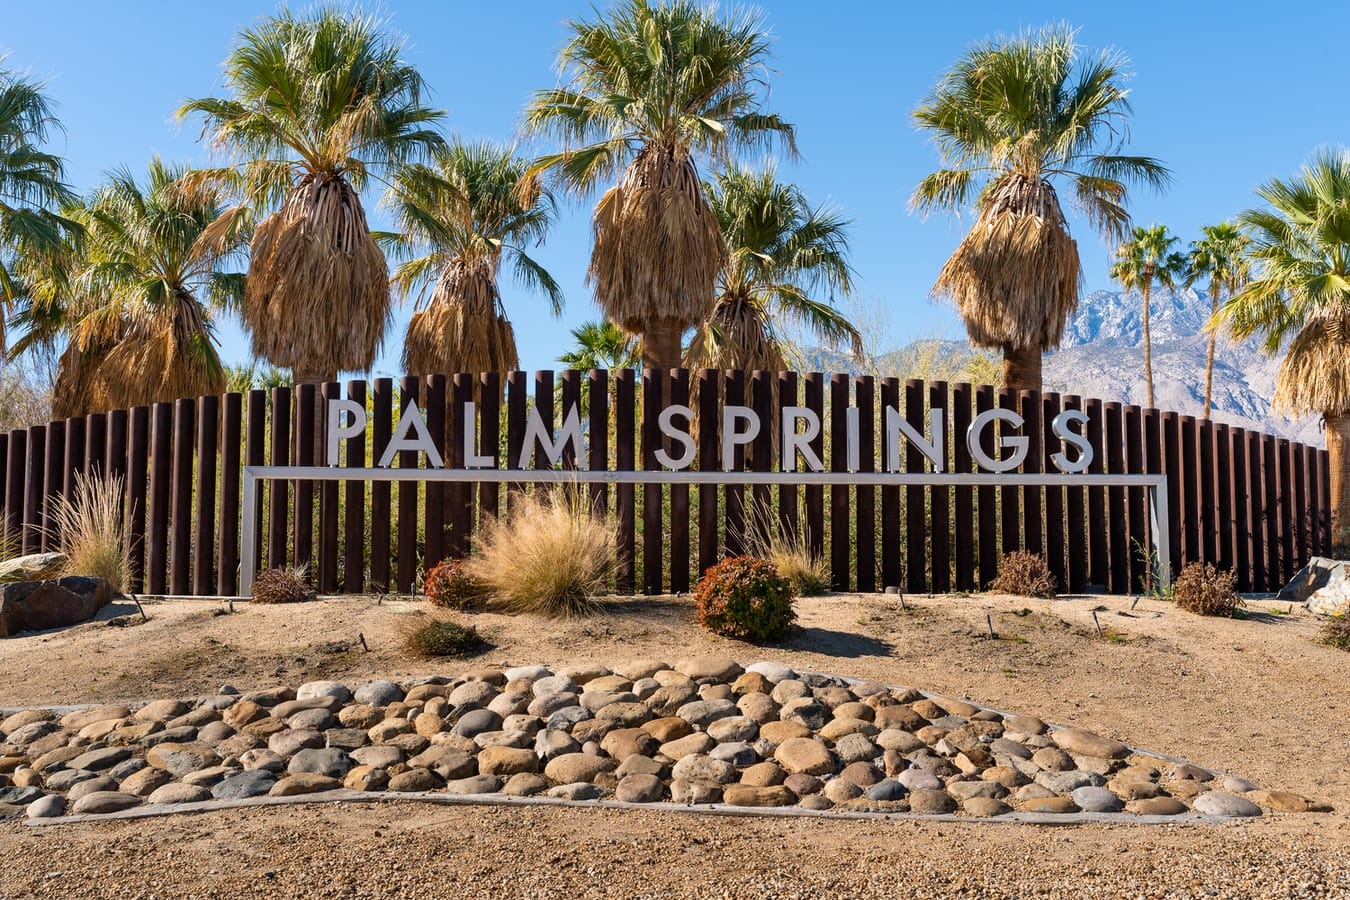 15 Unique Things To Do In Palm Springs: Retro-Chic, Glamorous and Back Again!